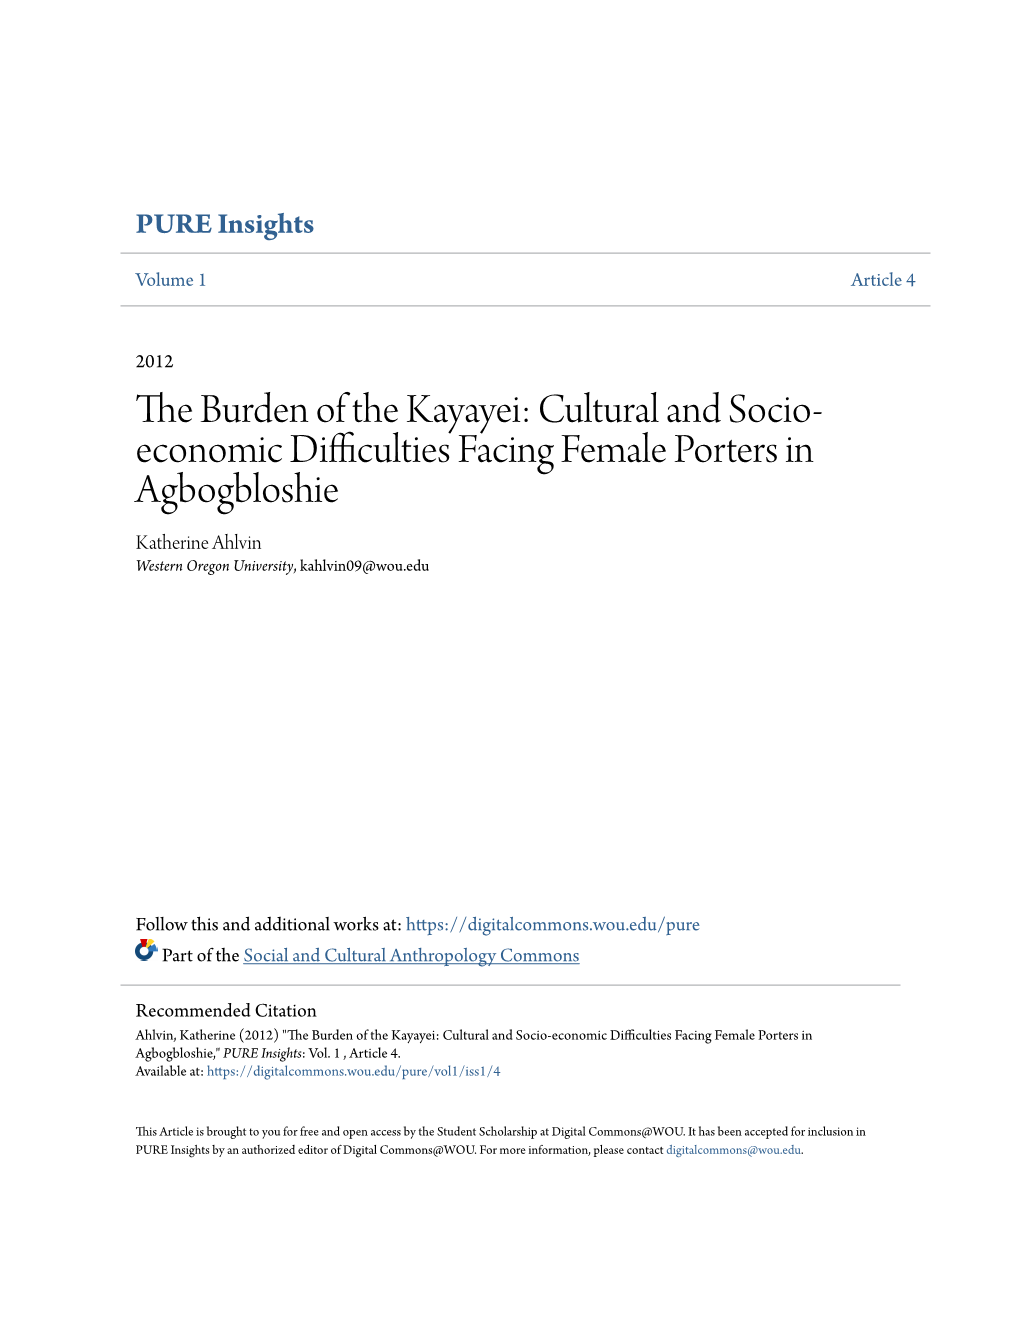 The Burden of the Kayayei: Cultural and Socio-Economic Difficulties Facing Female Porters in Agbogbloshie, Ghana